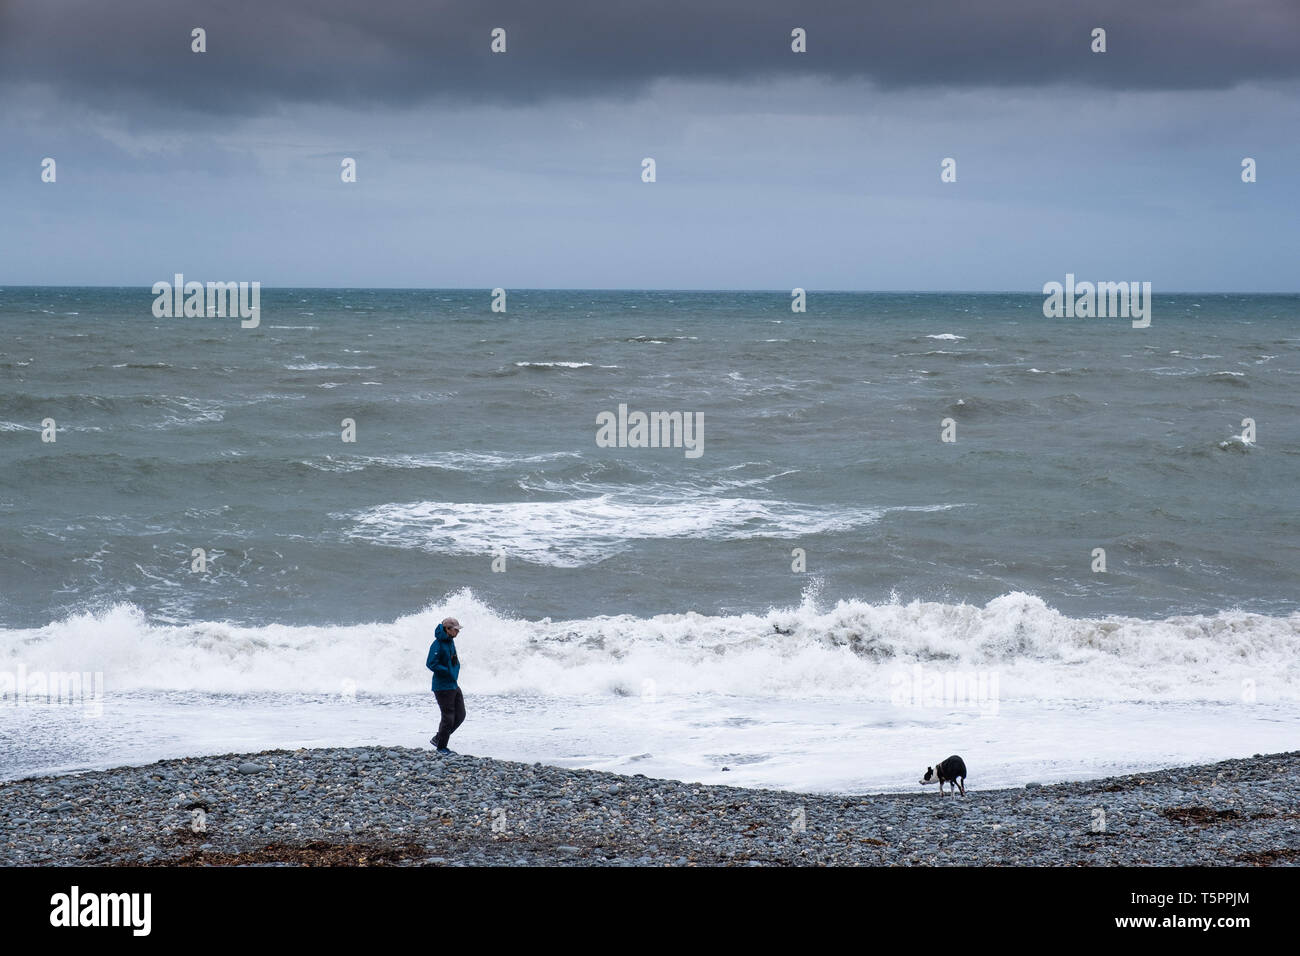 Aberystwyth, Wales. Friday 26th April 2019. UK Weather: Dark clouds and choppy seas foretell the arrival of Storm Hannah, the latest named storm of the 2019 season. With winds expecting to gust at between 60 and 70mpg overnight, there is a risk of damage to property and injuries. The Met Office has issued a yellow warning for strong winds covering much of the south of the UK from this evening until mid afternoon tomorrow photo Credit: keith morris/Alamy Live News Stock Photo